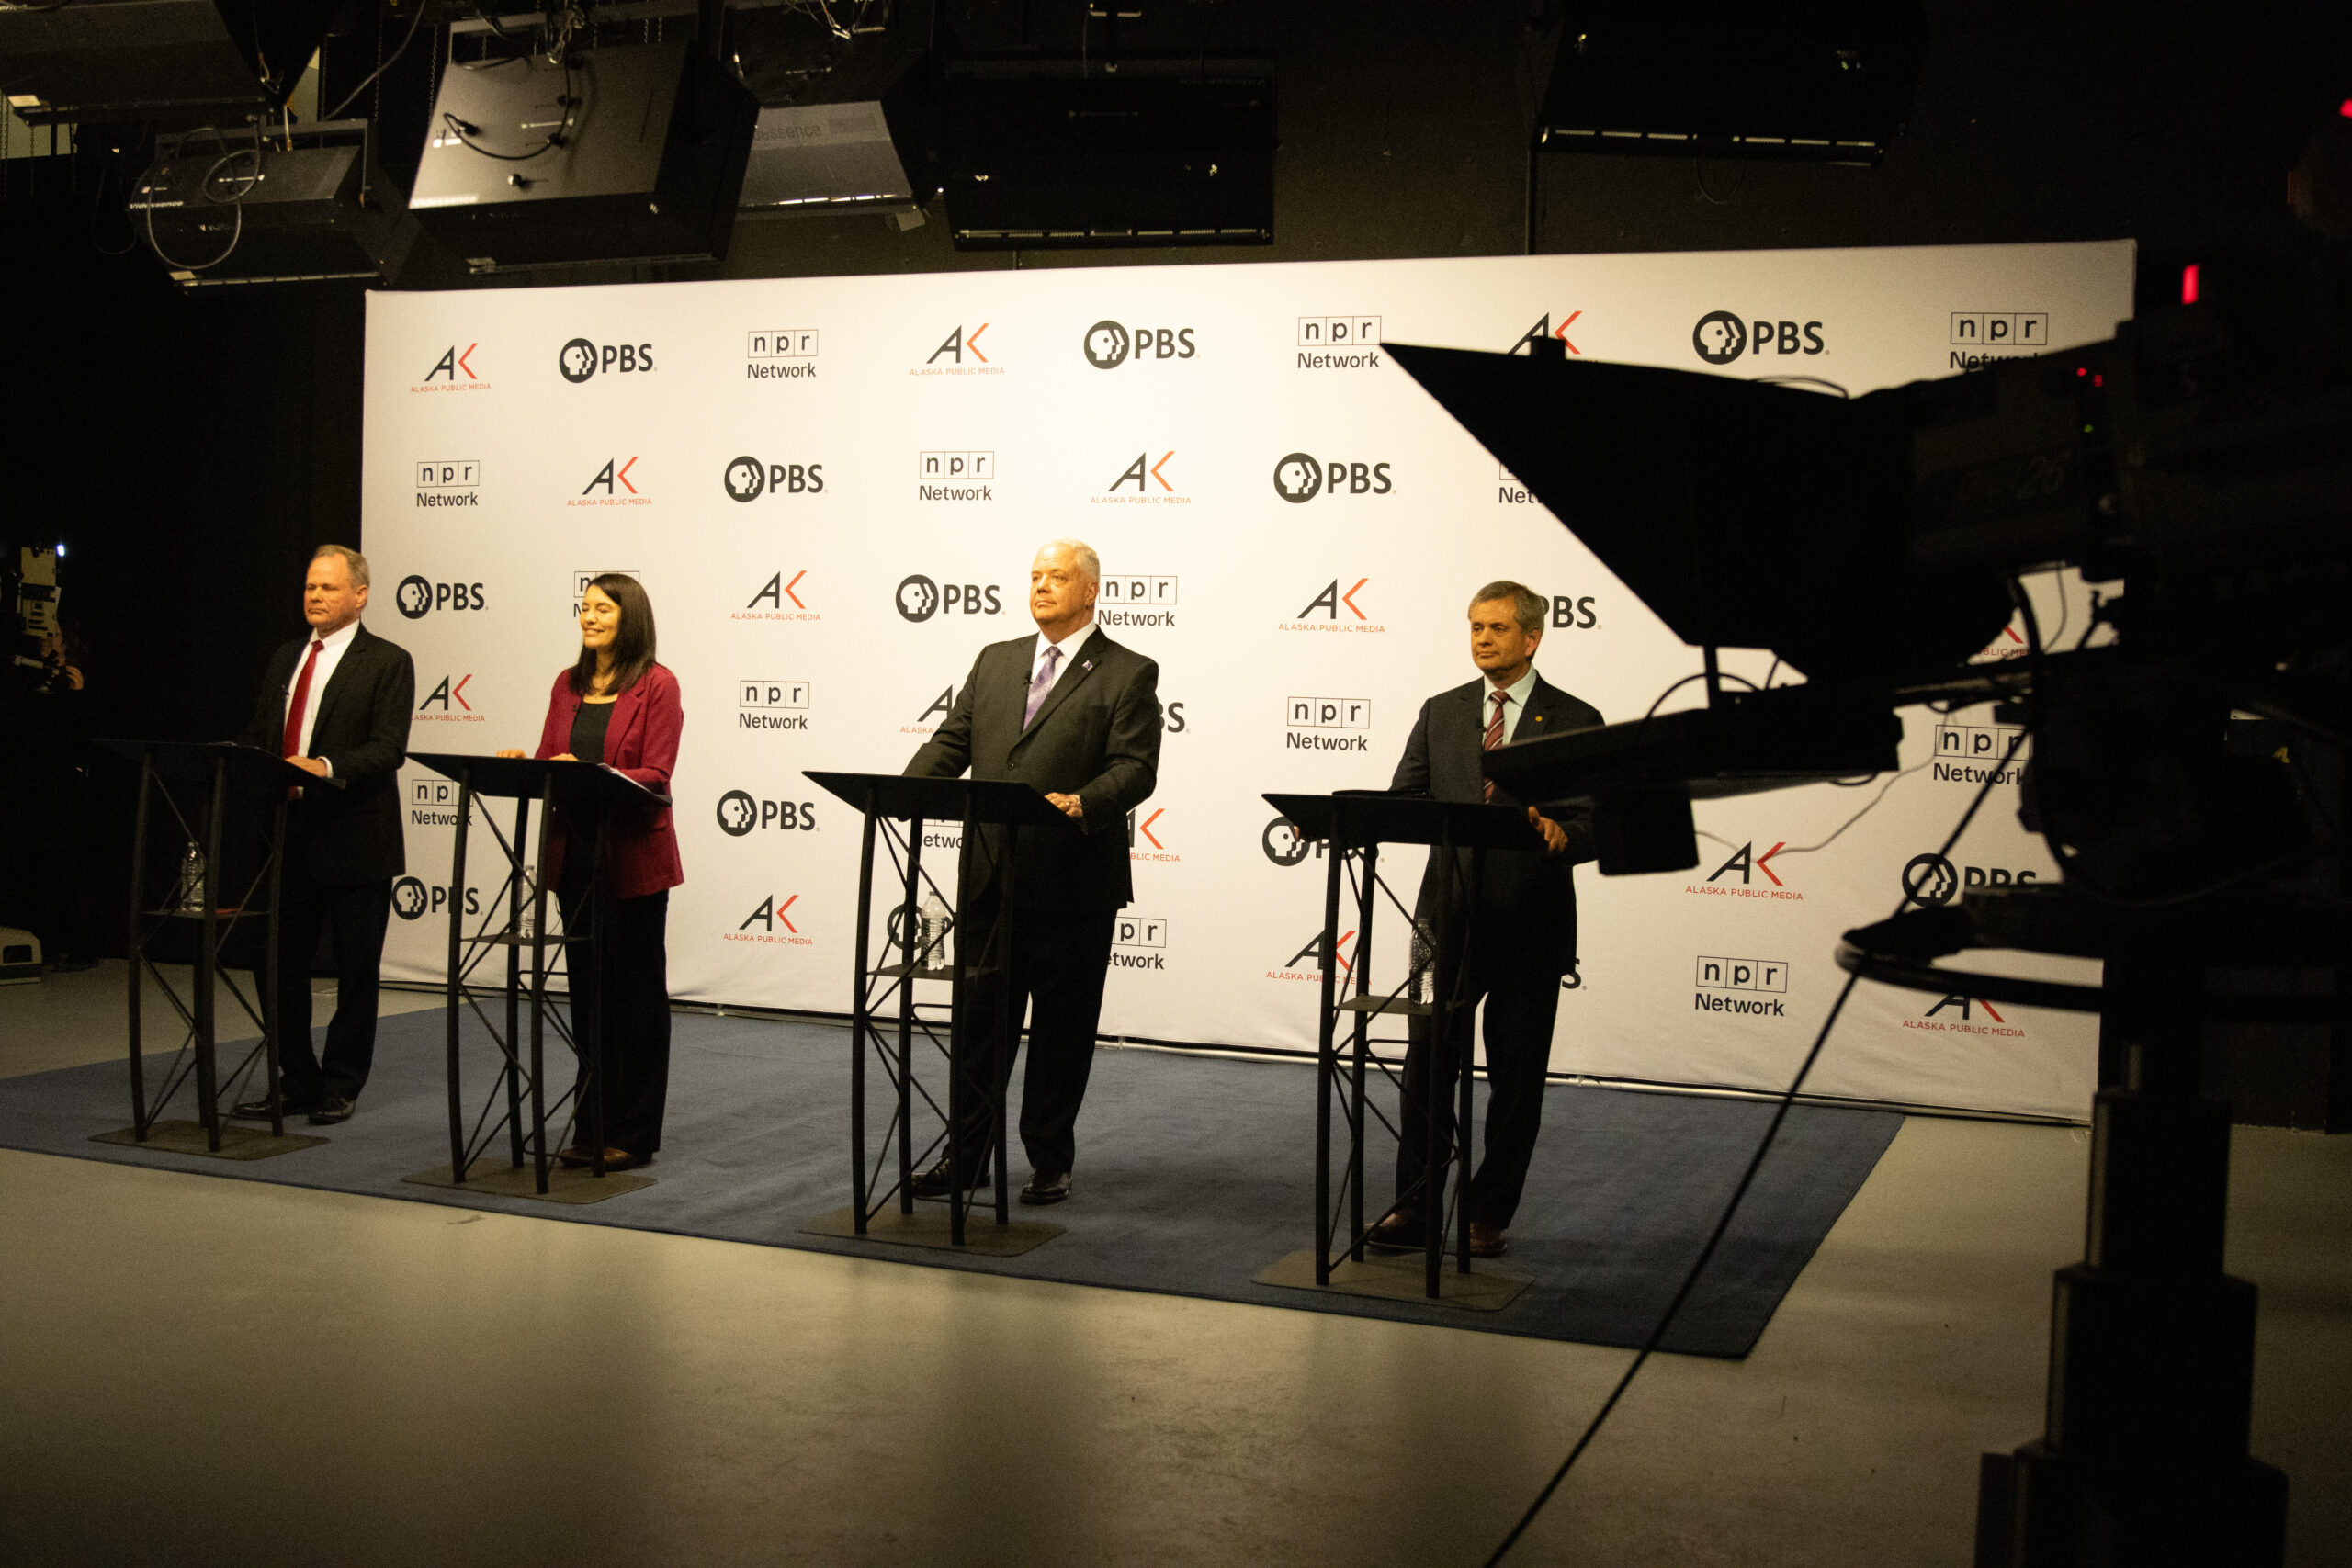 Four people, a man in a suit with red tie, a woman with a deep red blazer, a man in a suit with purple tie, and a man in a suit with a striped tie stand behind podiums in front of a white backdrop with the logos for PBS, NPR, and Alaska Public Media preparing for a debate.